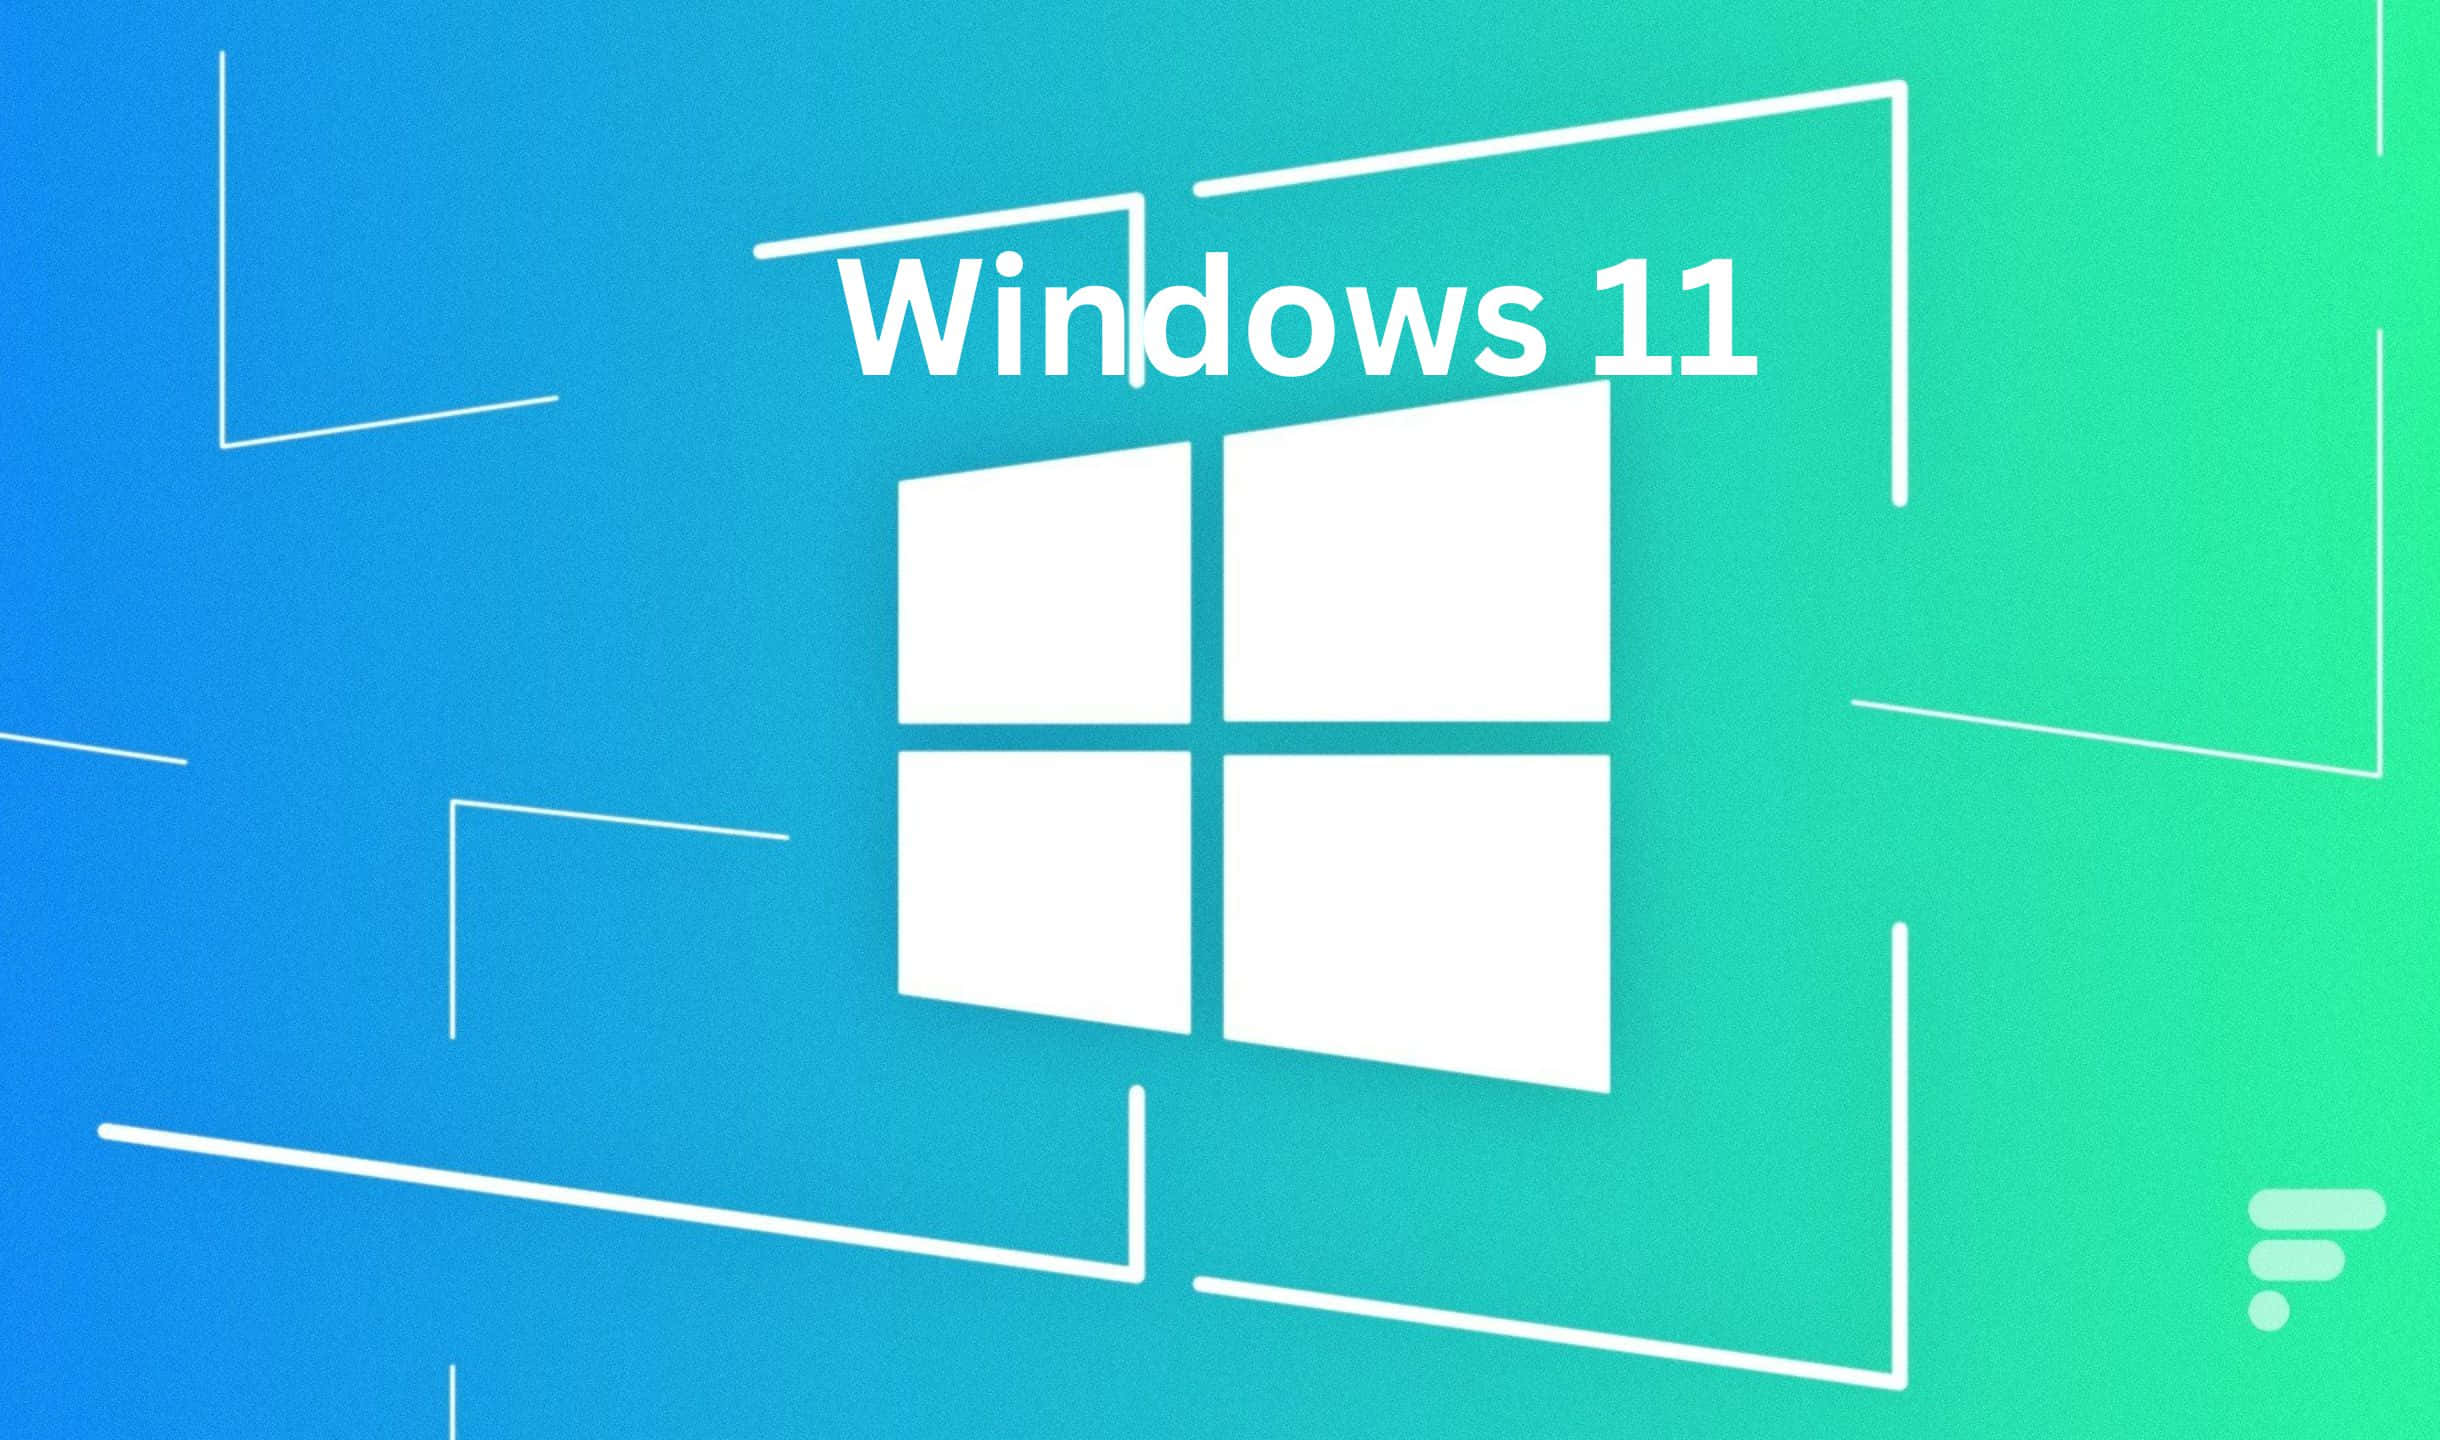 Download Windows 10 Logo With A Blue Background | Wallpapers.com